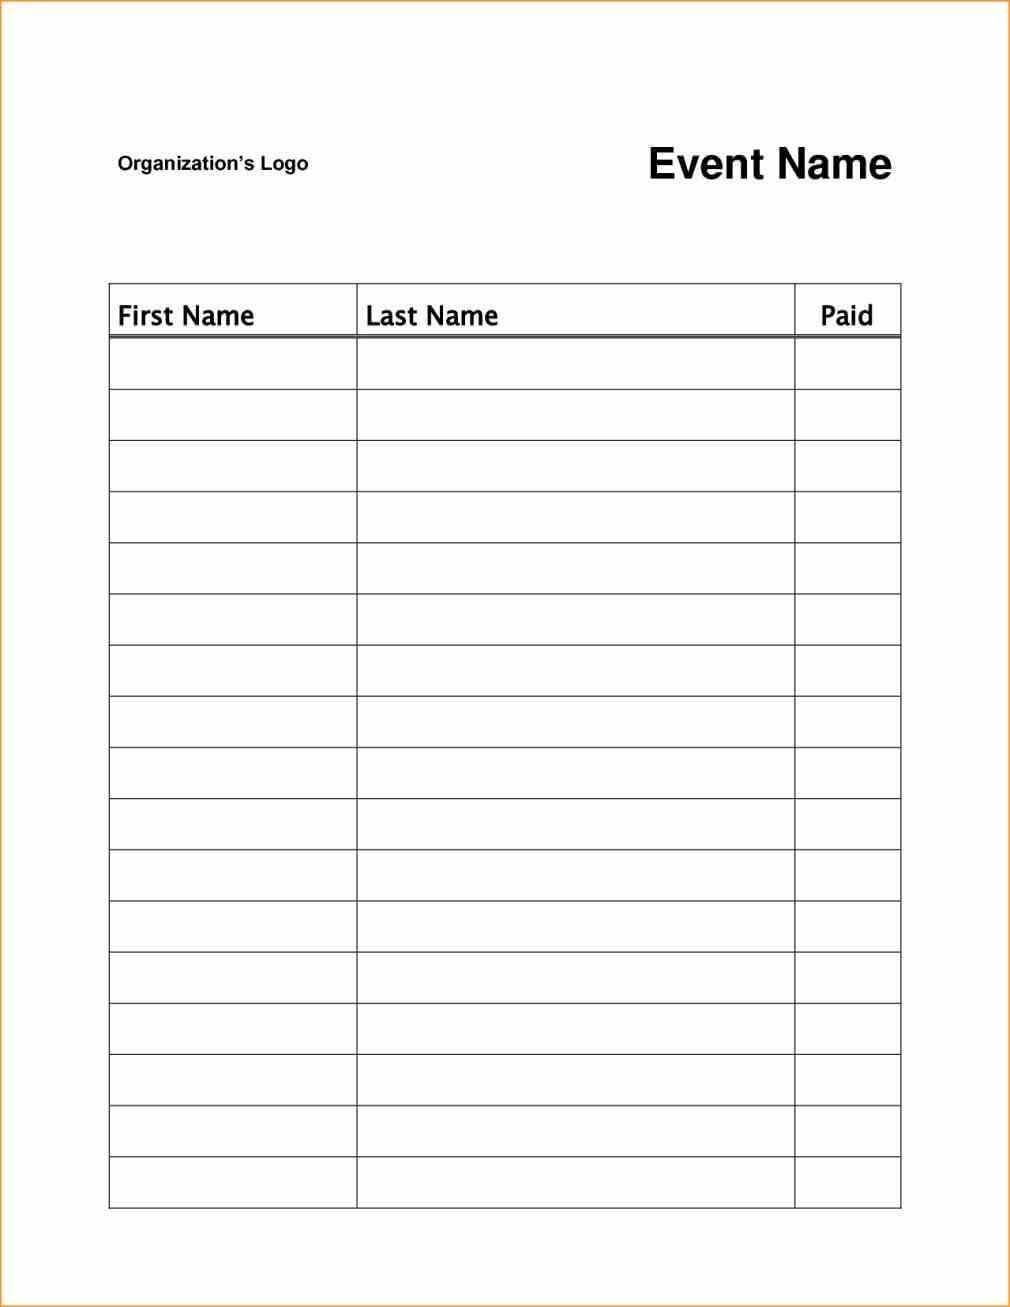 Event Or Class Workshop Forms A Sign Up Sheet Template Word Within Free Sign Up Sheet Template Word